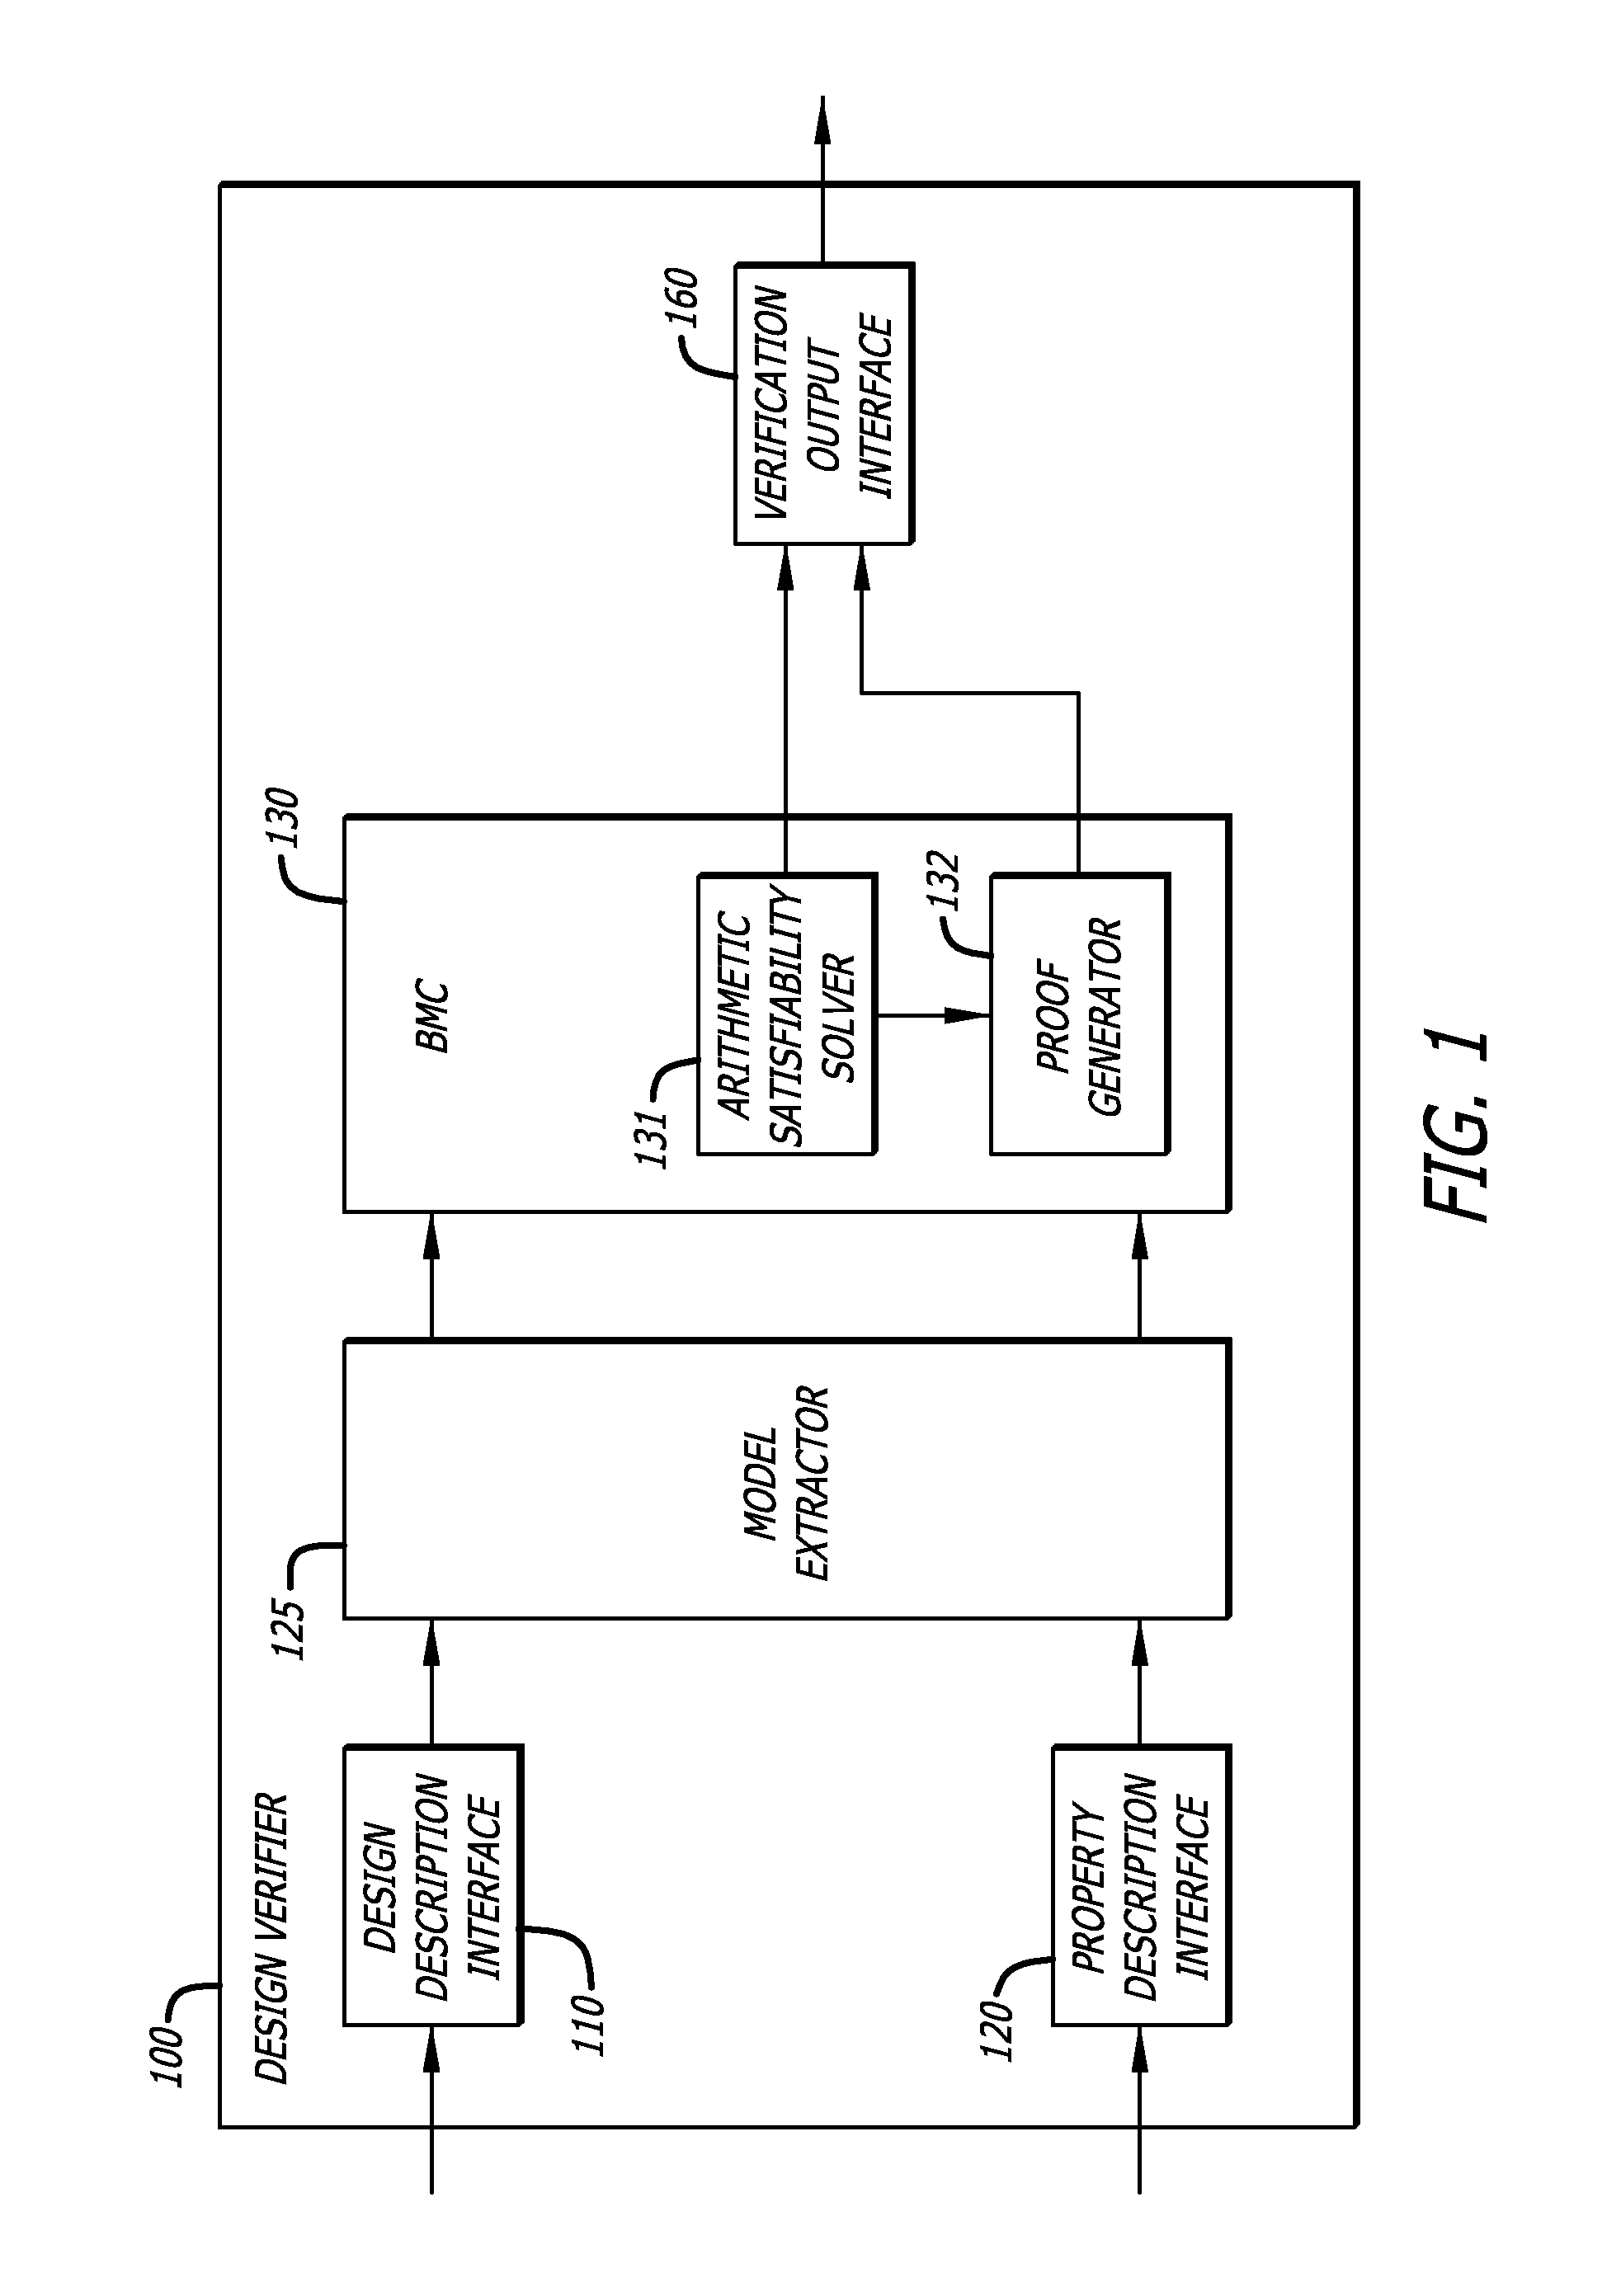 Apparatus with general numeric backtracking algorithm for solving satisfiability problems to verify functionality of circuits and software